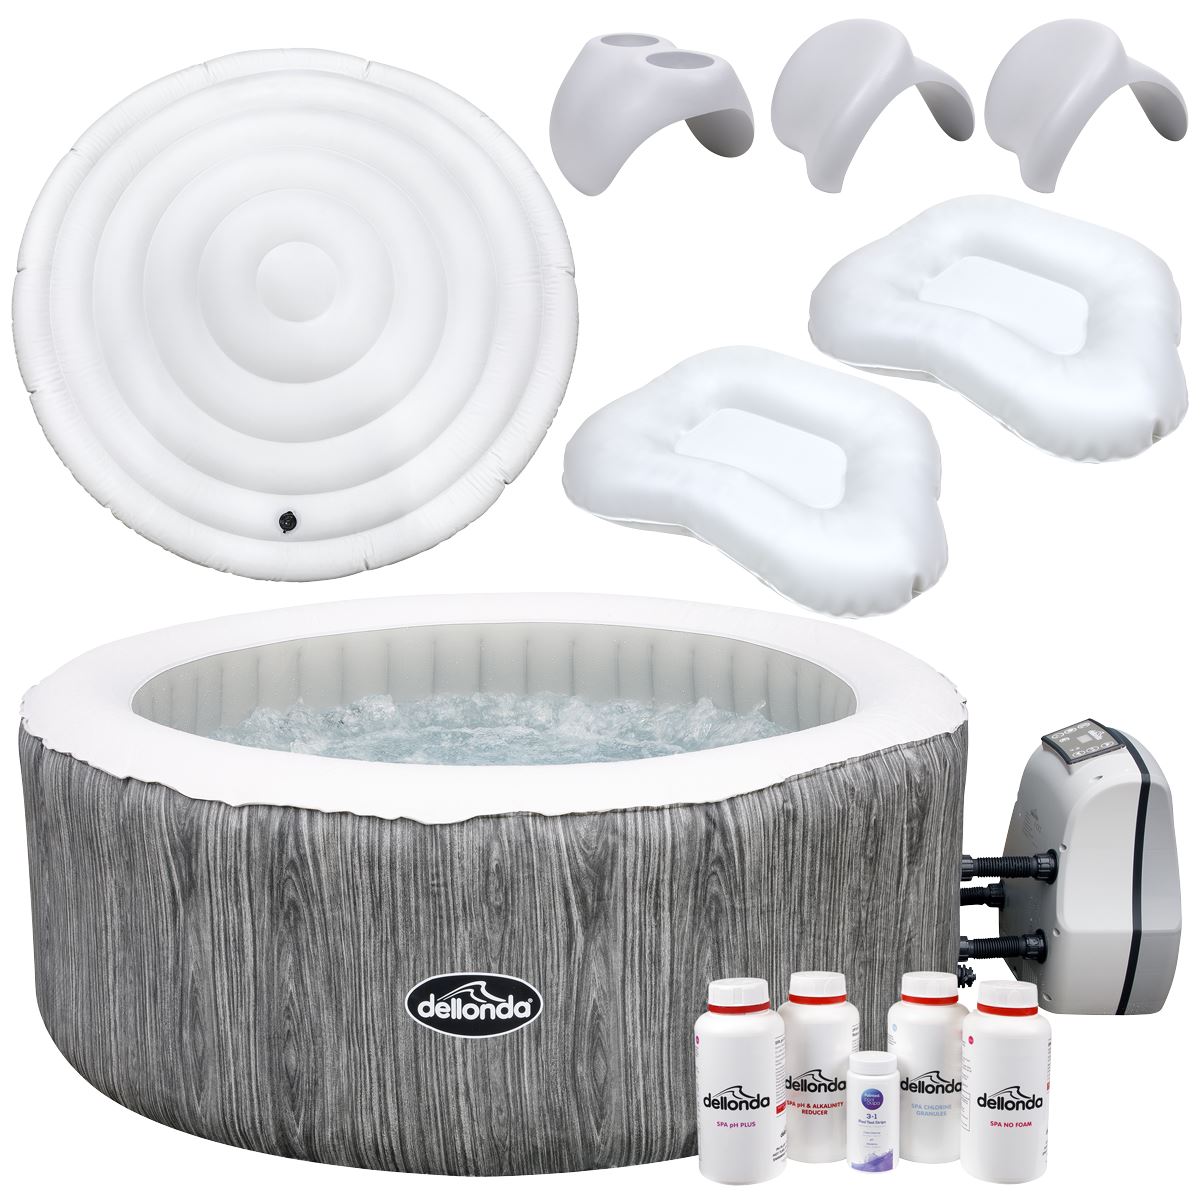 Dellonda 4-6 Person Inflatable Hot Tub Spa Starter Kit with Smart Pump - Wood Effect